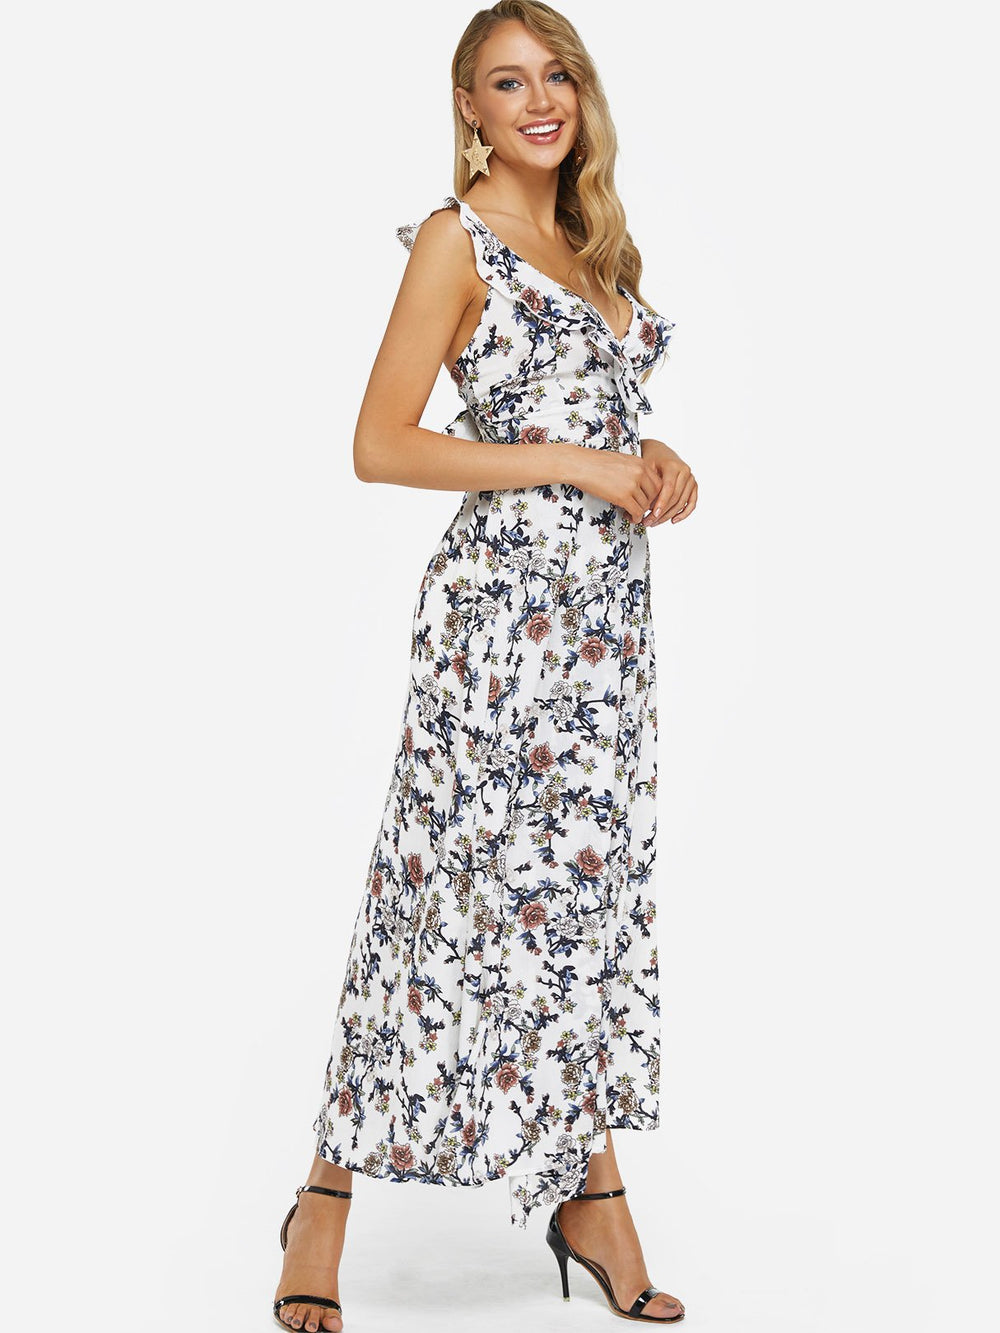 Navy Blue Floral Dress With Sleeves